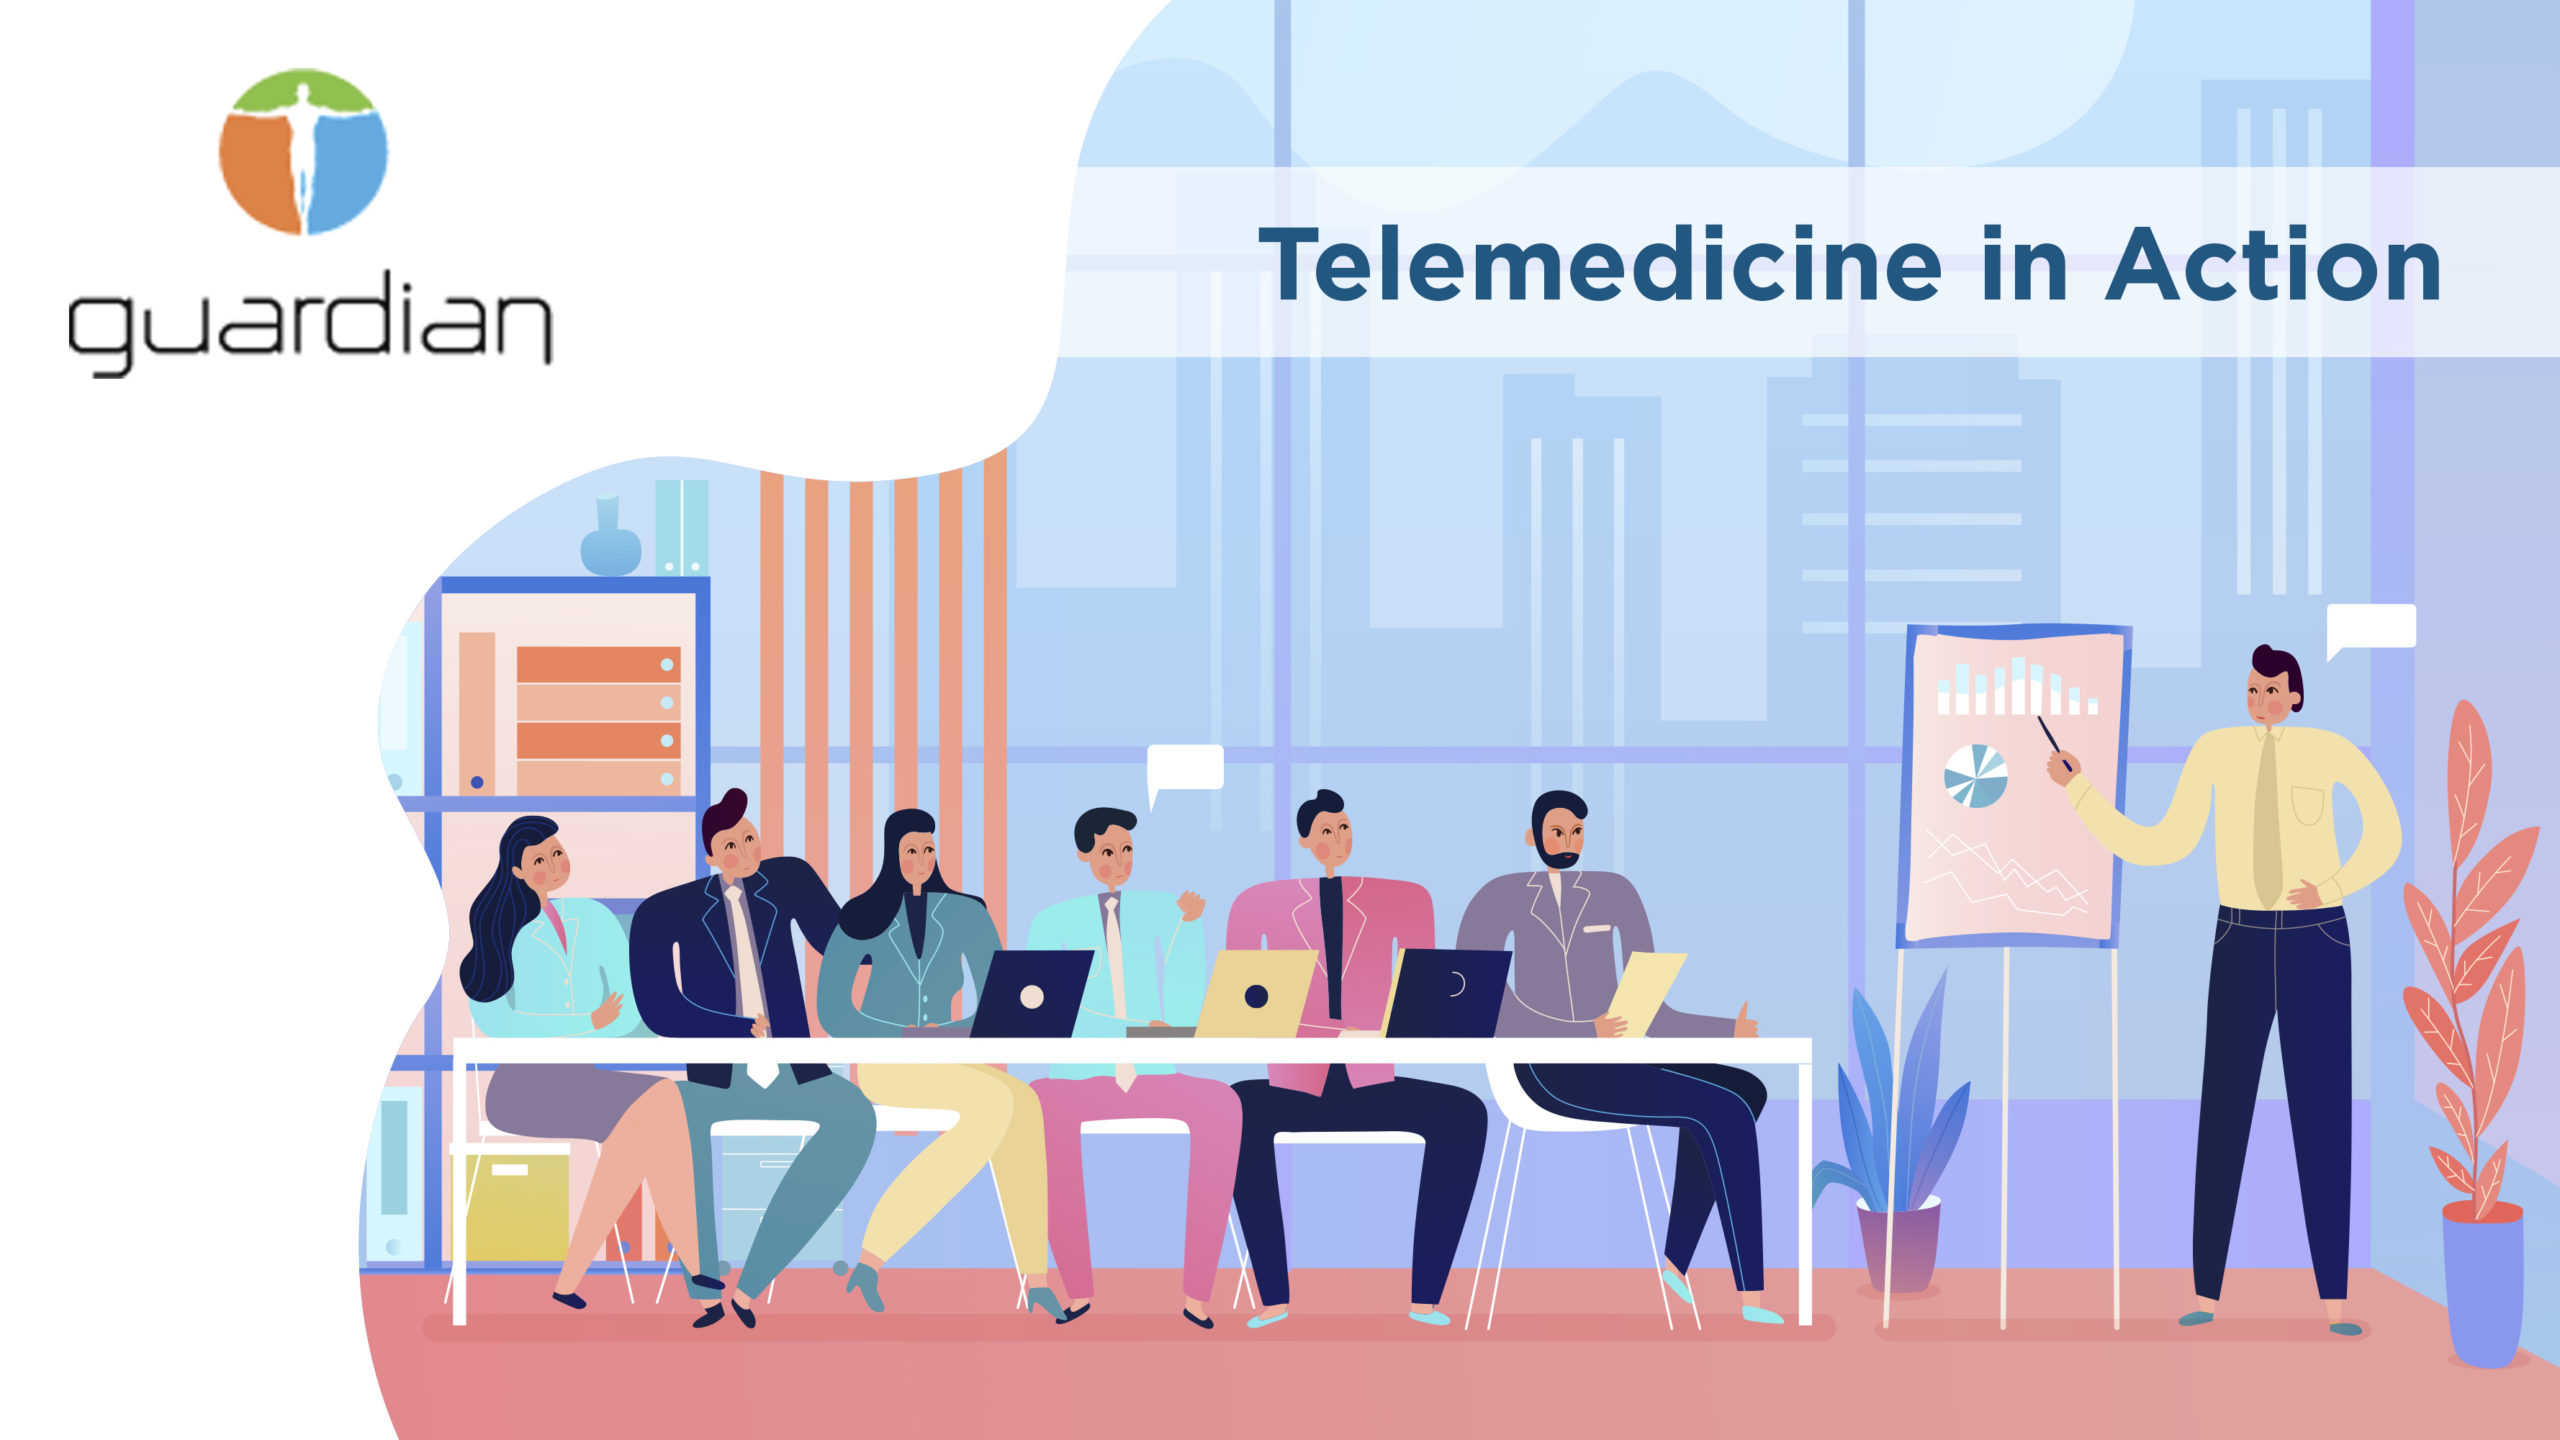 Guardian Telemedicine in Action – March 17, 2020